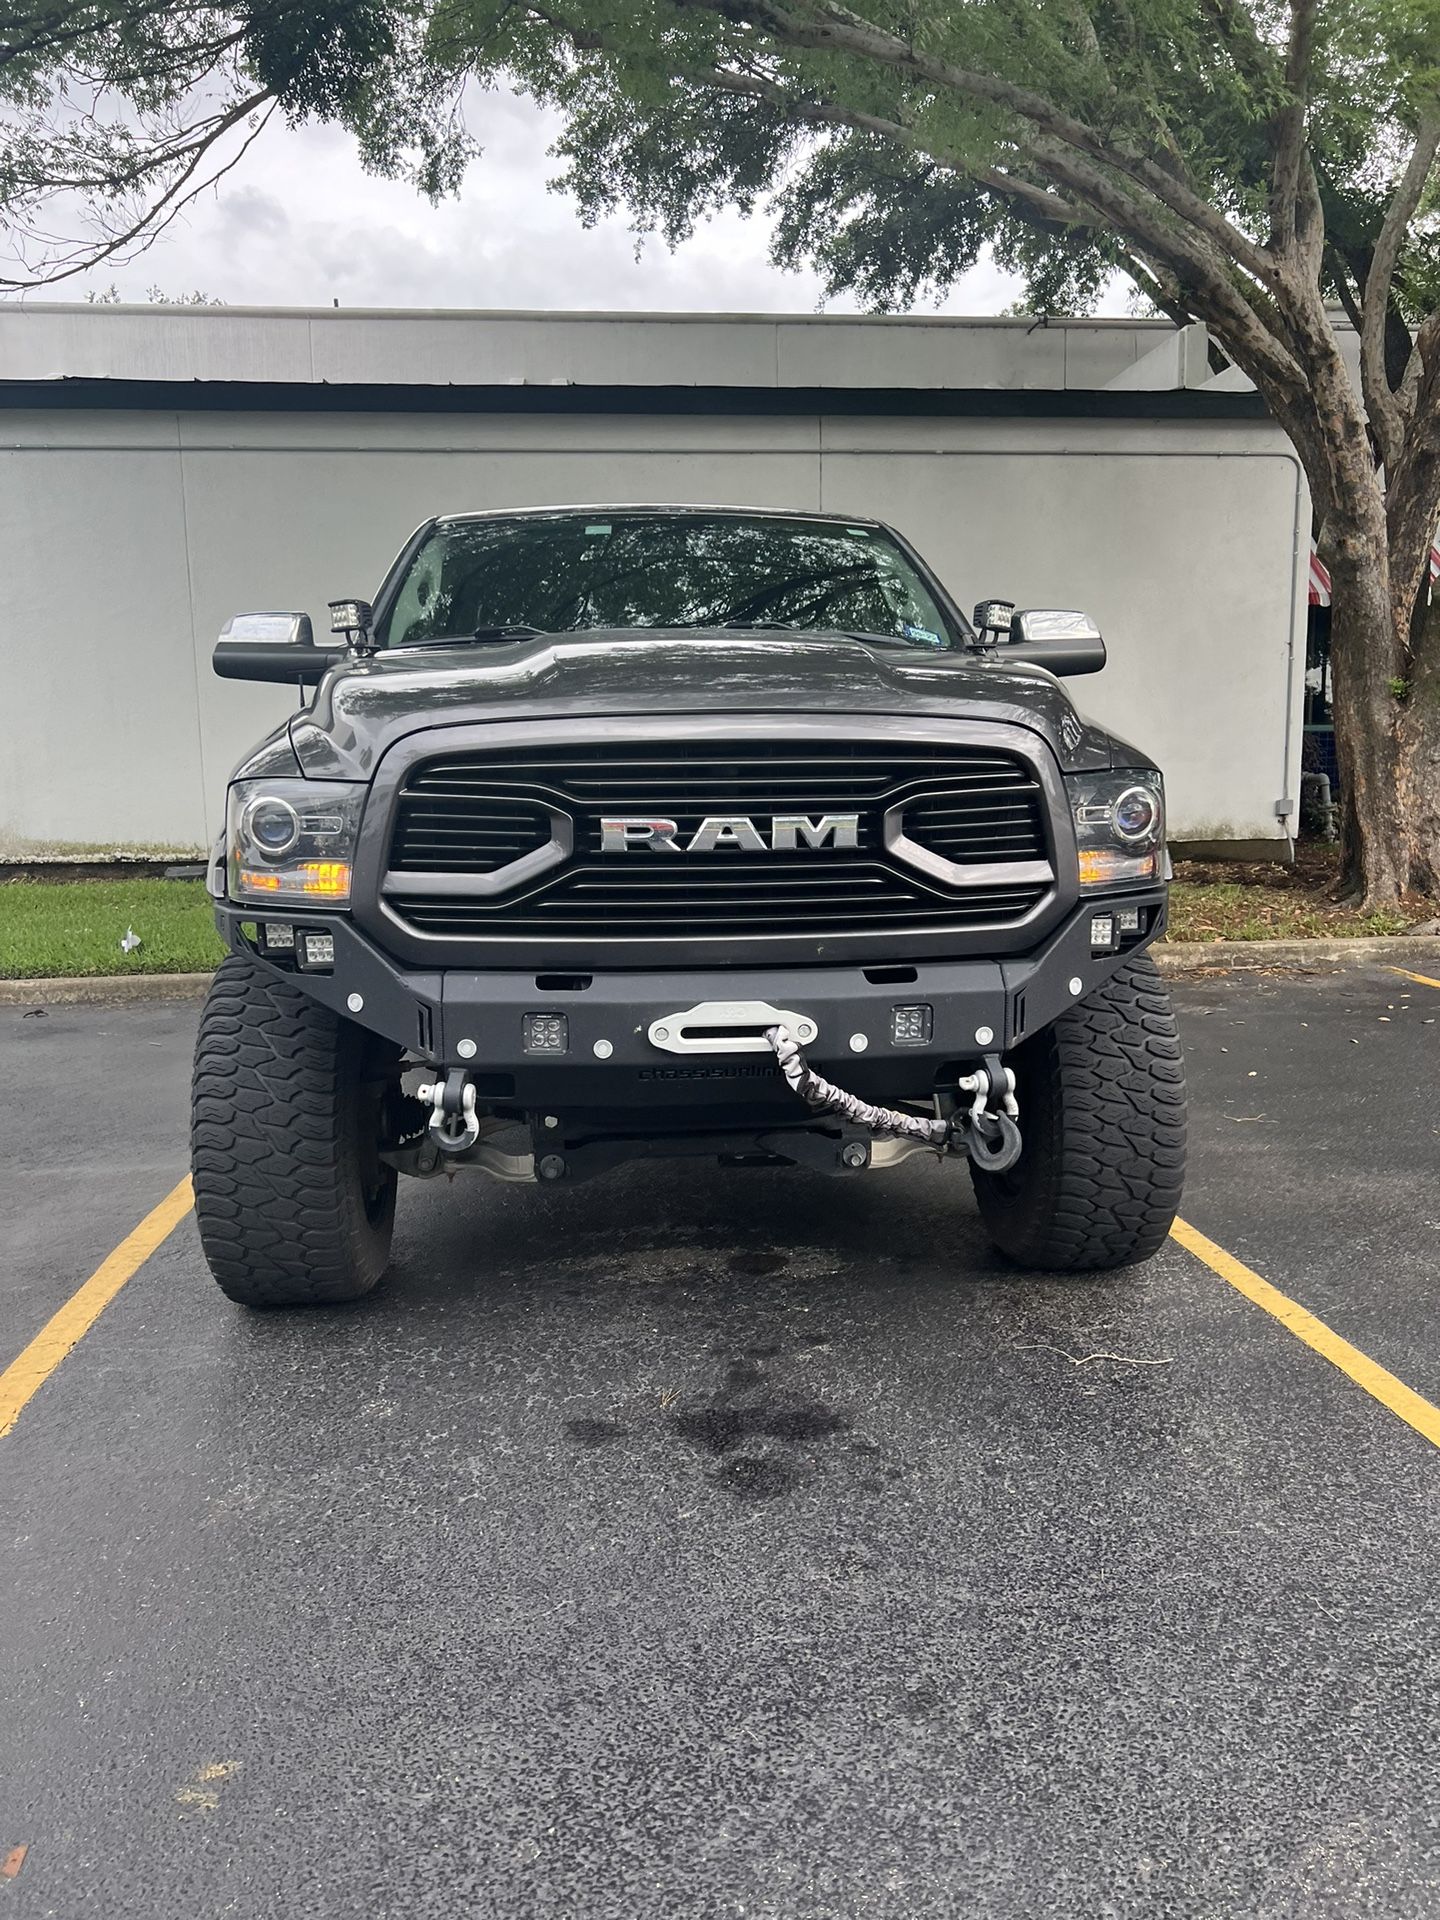 Ram 1500 Chassis Unlimited “Octane Series” front winch bumper